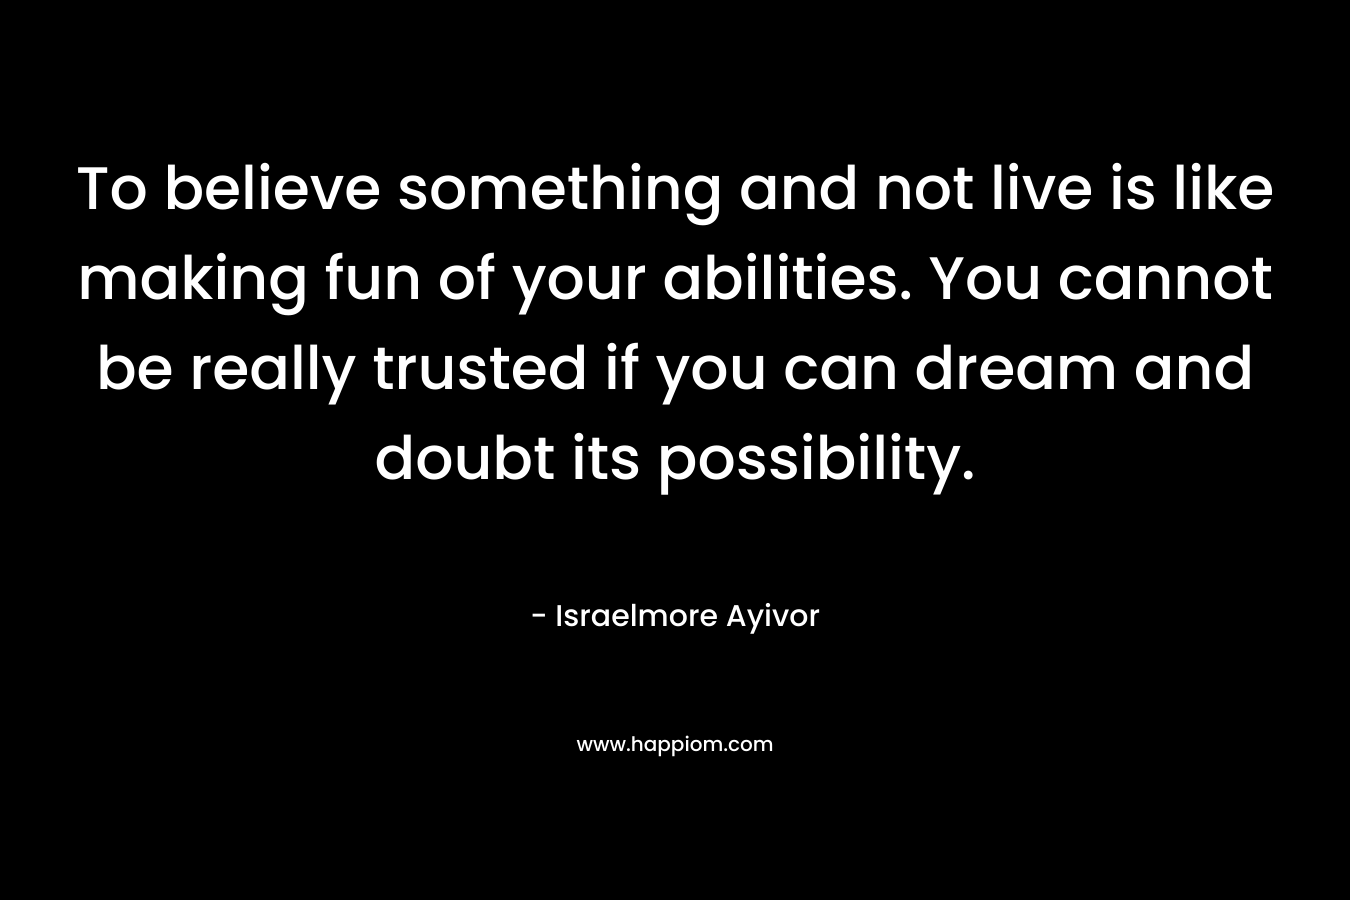 To believe something and not live is like making fun of your abilities. You cannot be really trusted if you can dream and doubt its possibility.